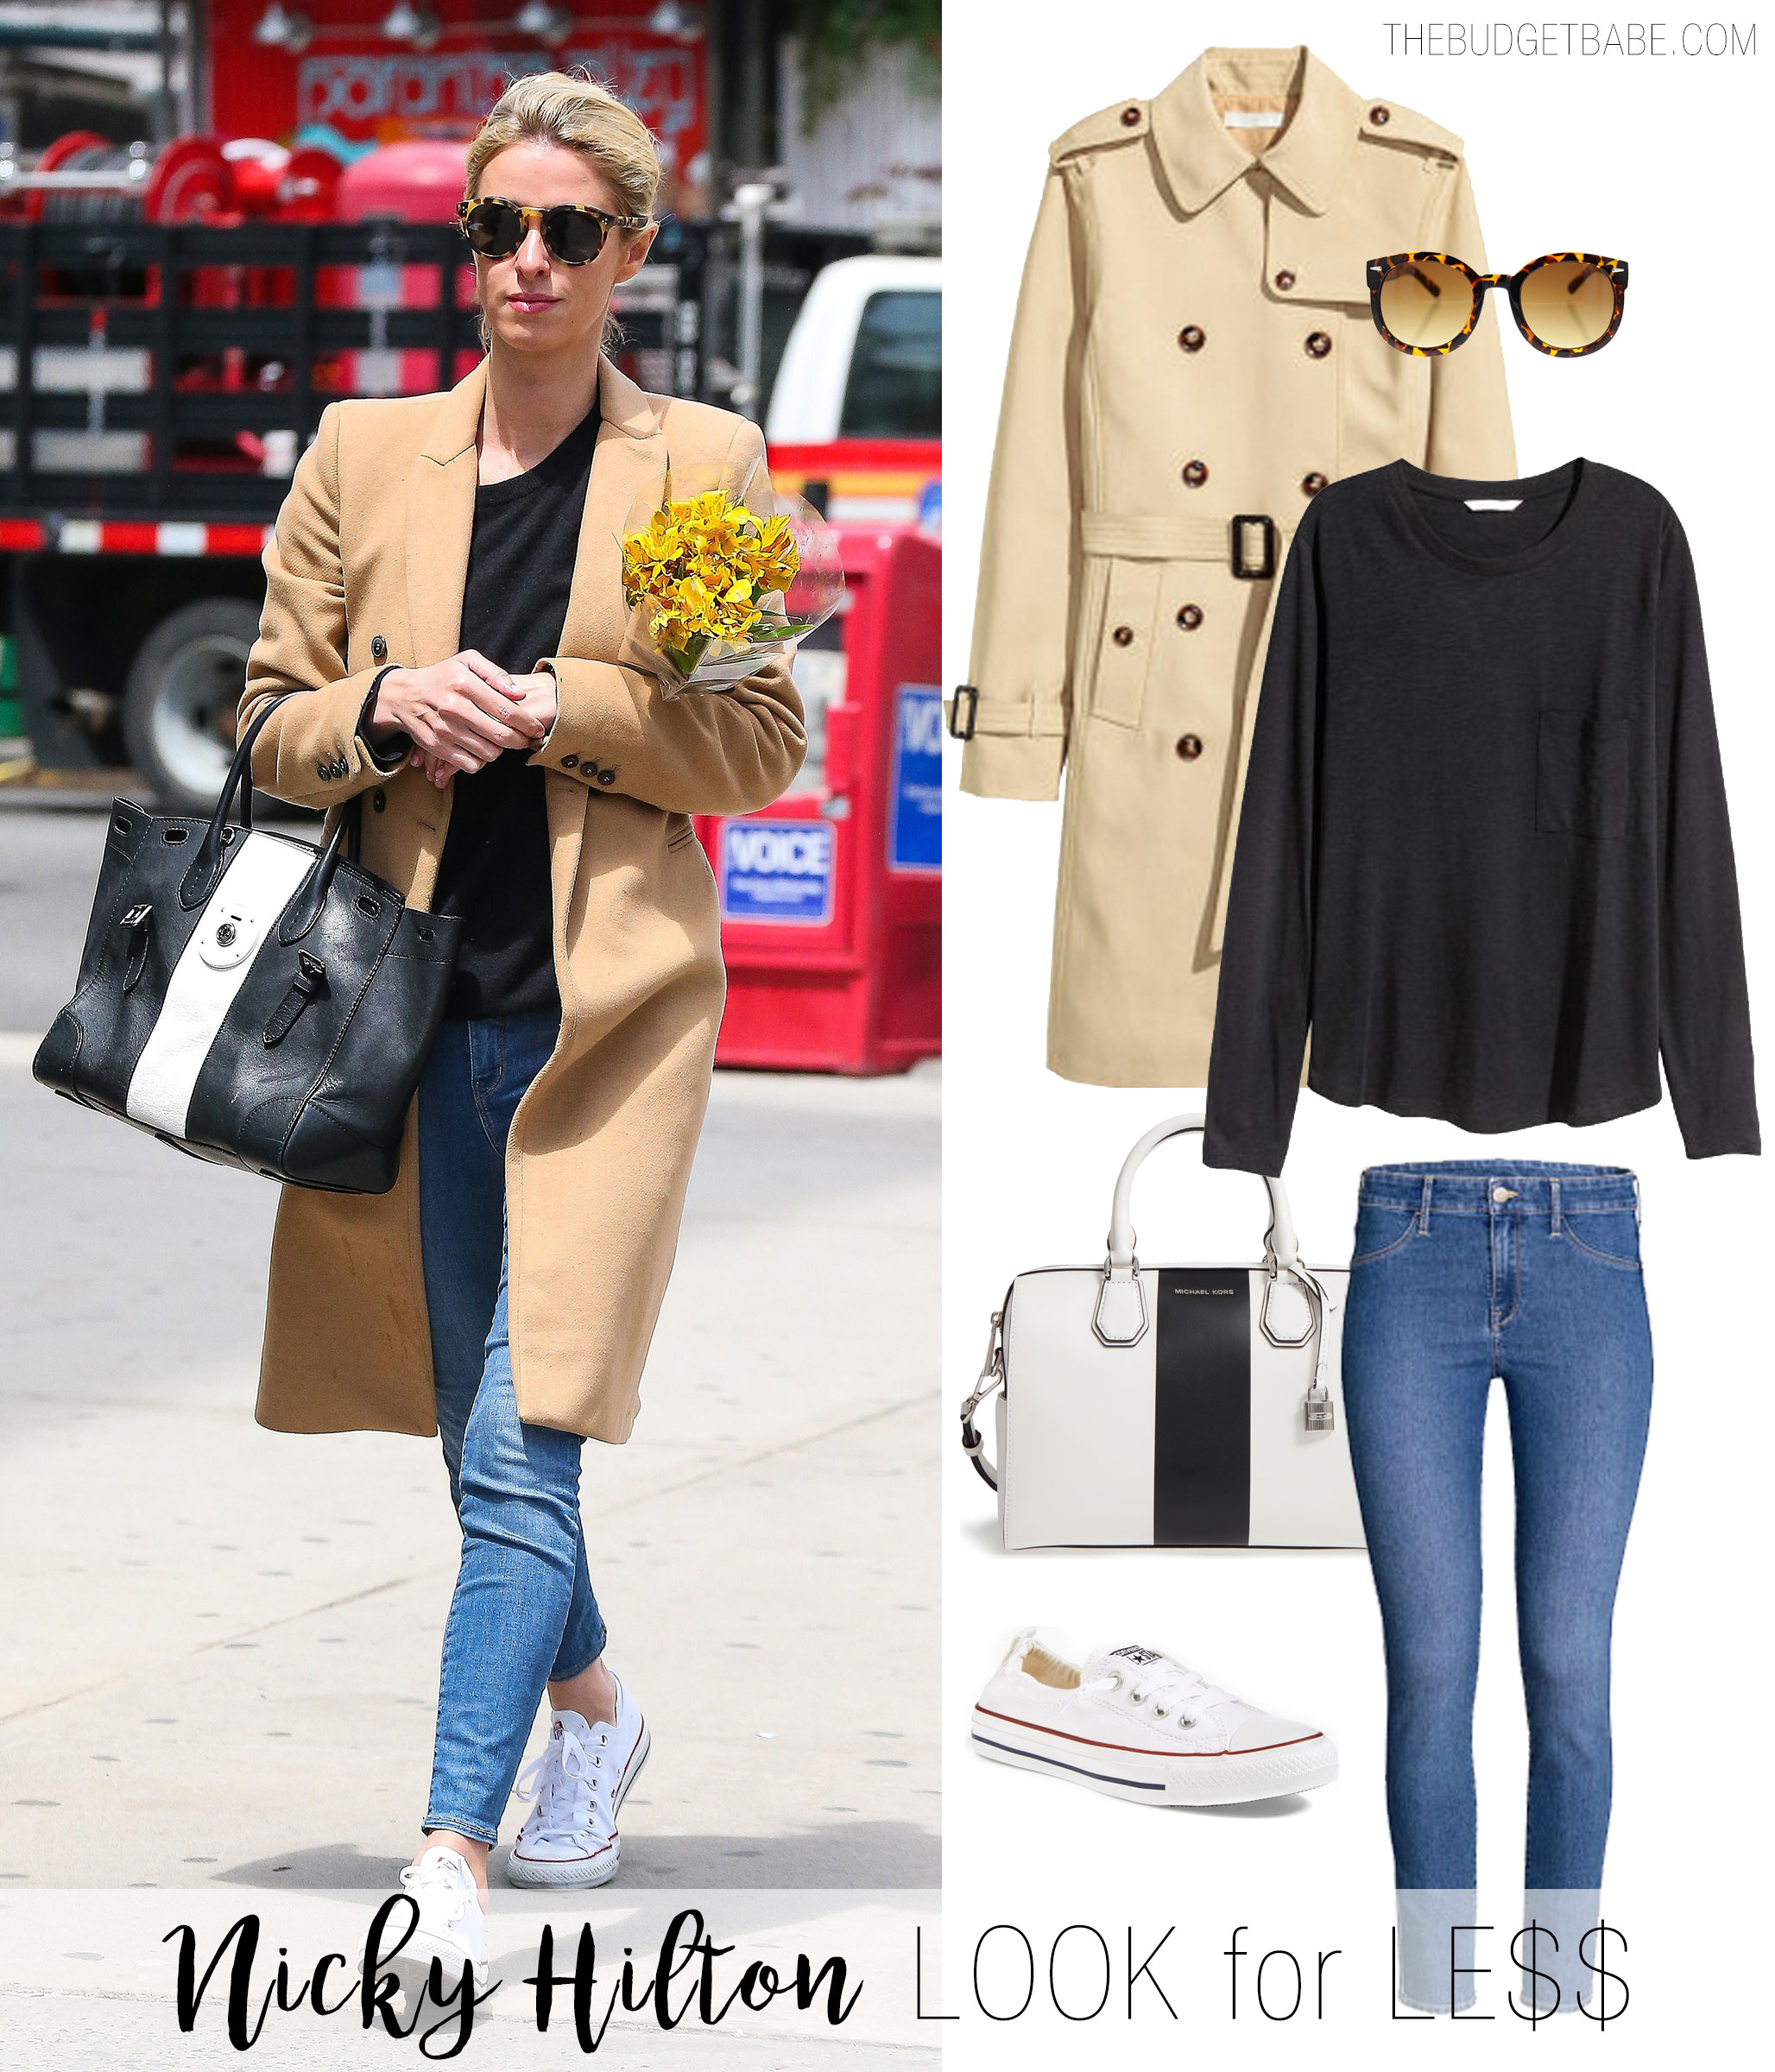 Nicky Hilton wears a camel coat and white Converse while out and about in New York City.